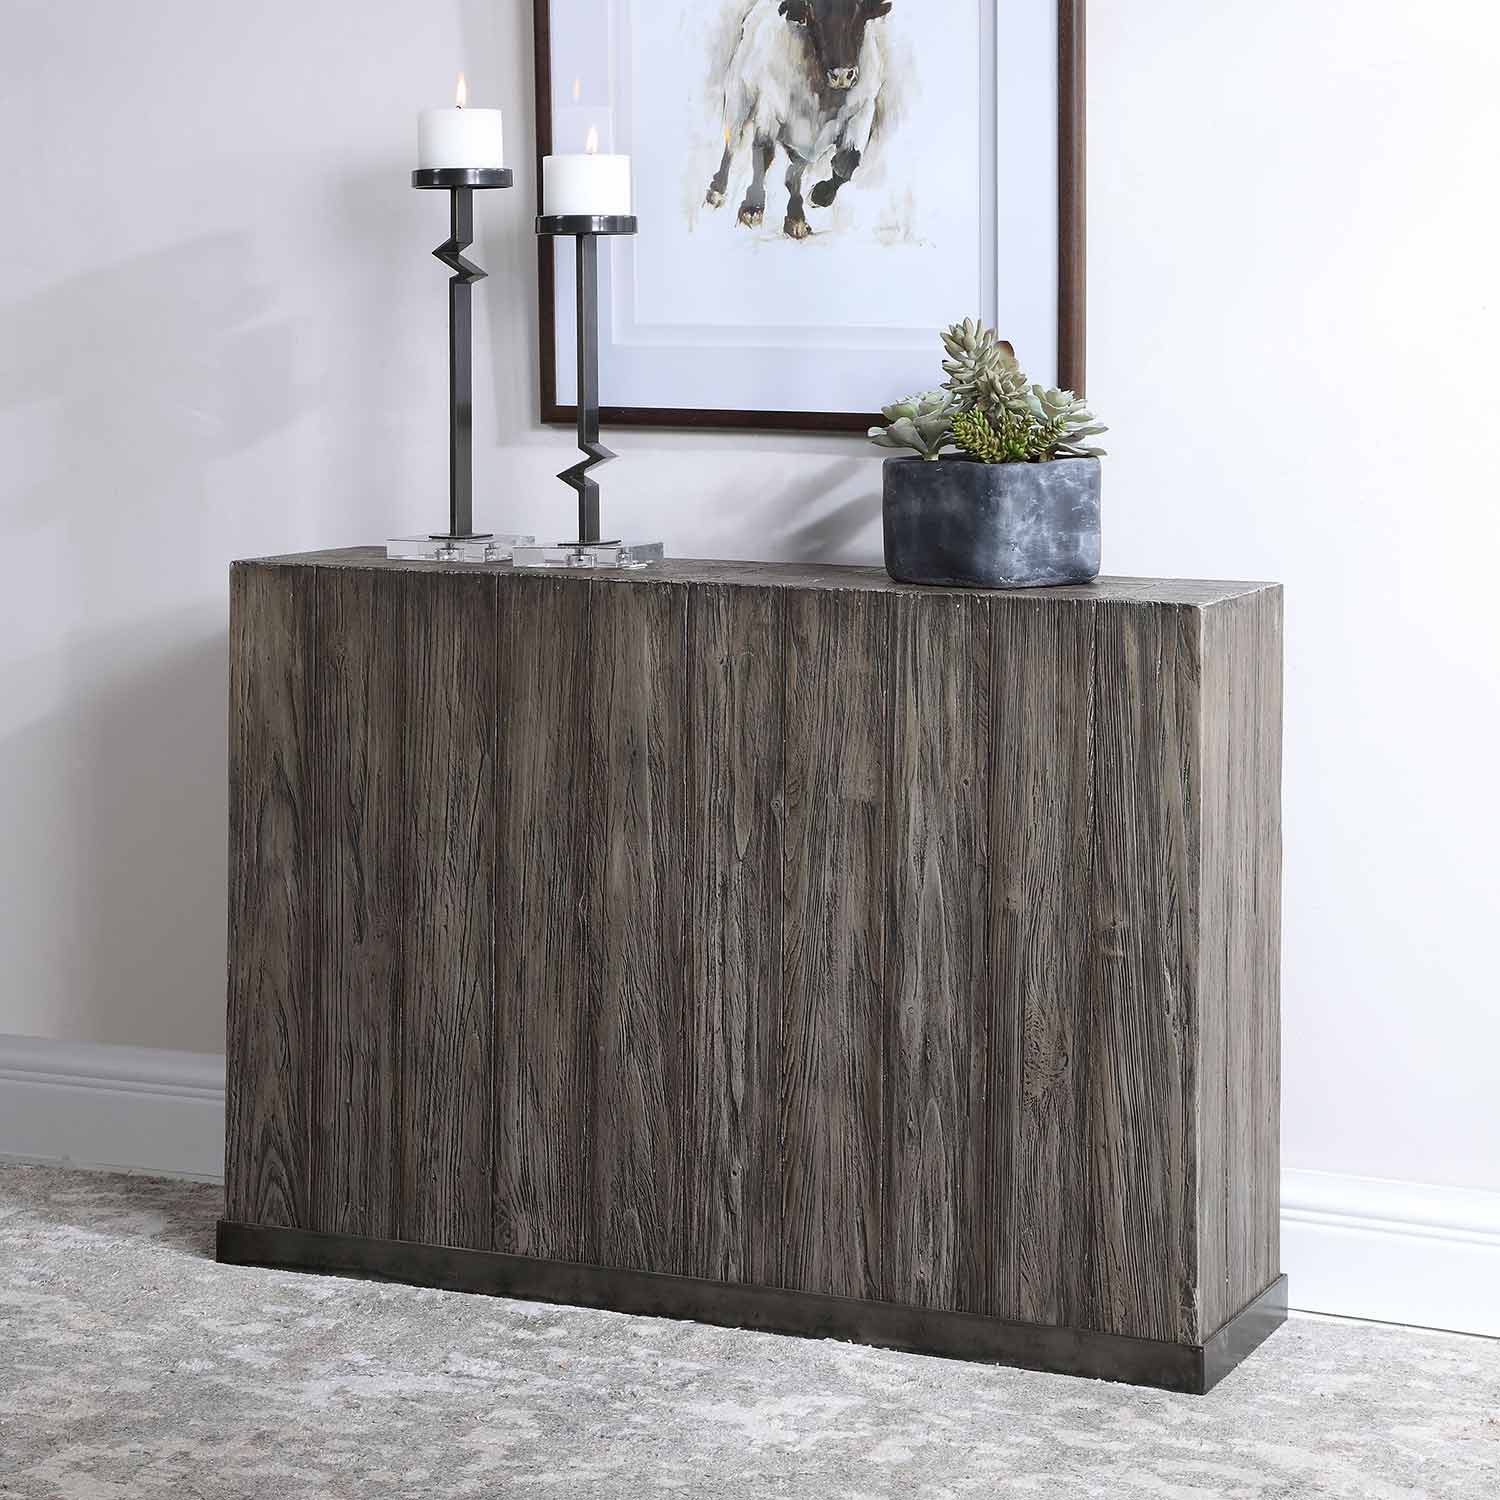 Uttermost Latham Reclaimed Wood Console Table